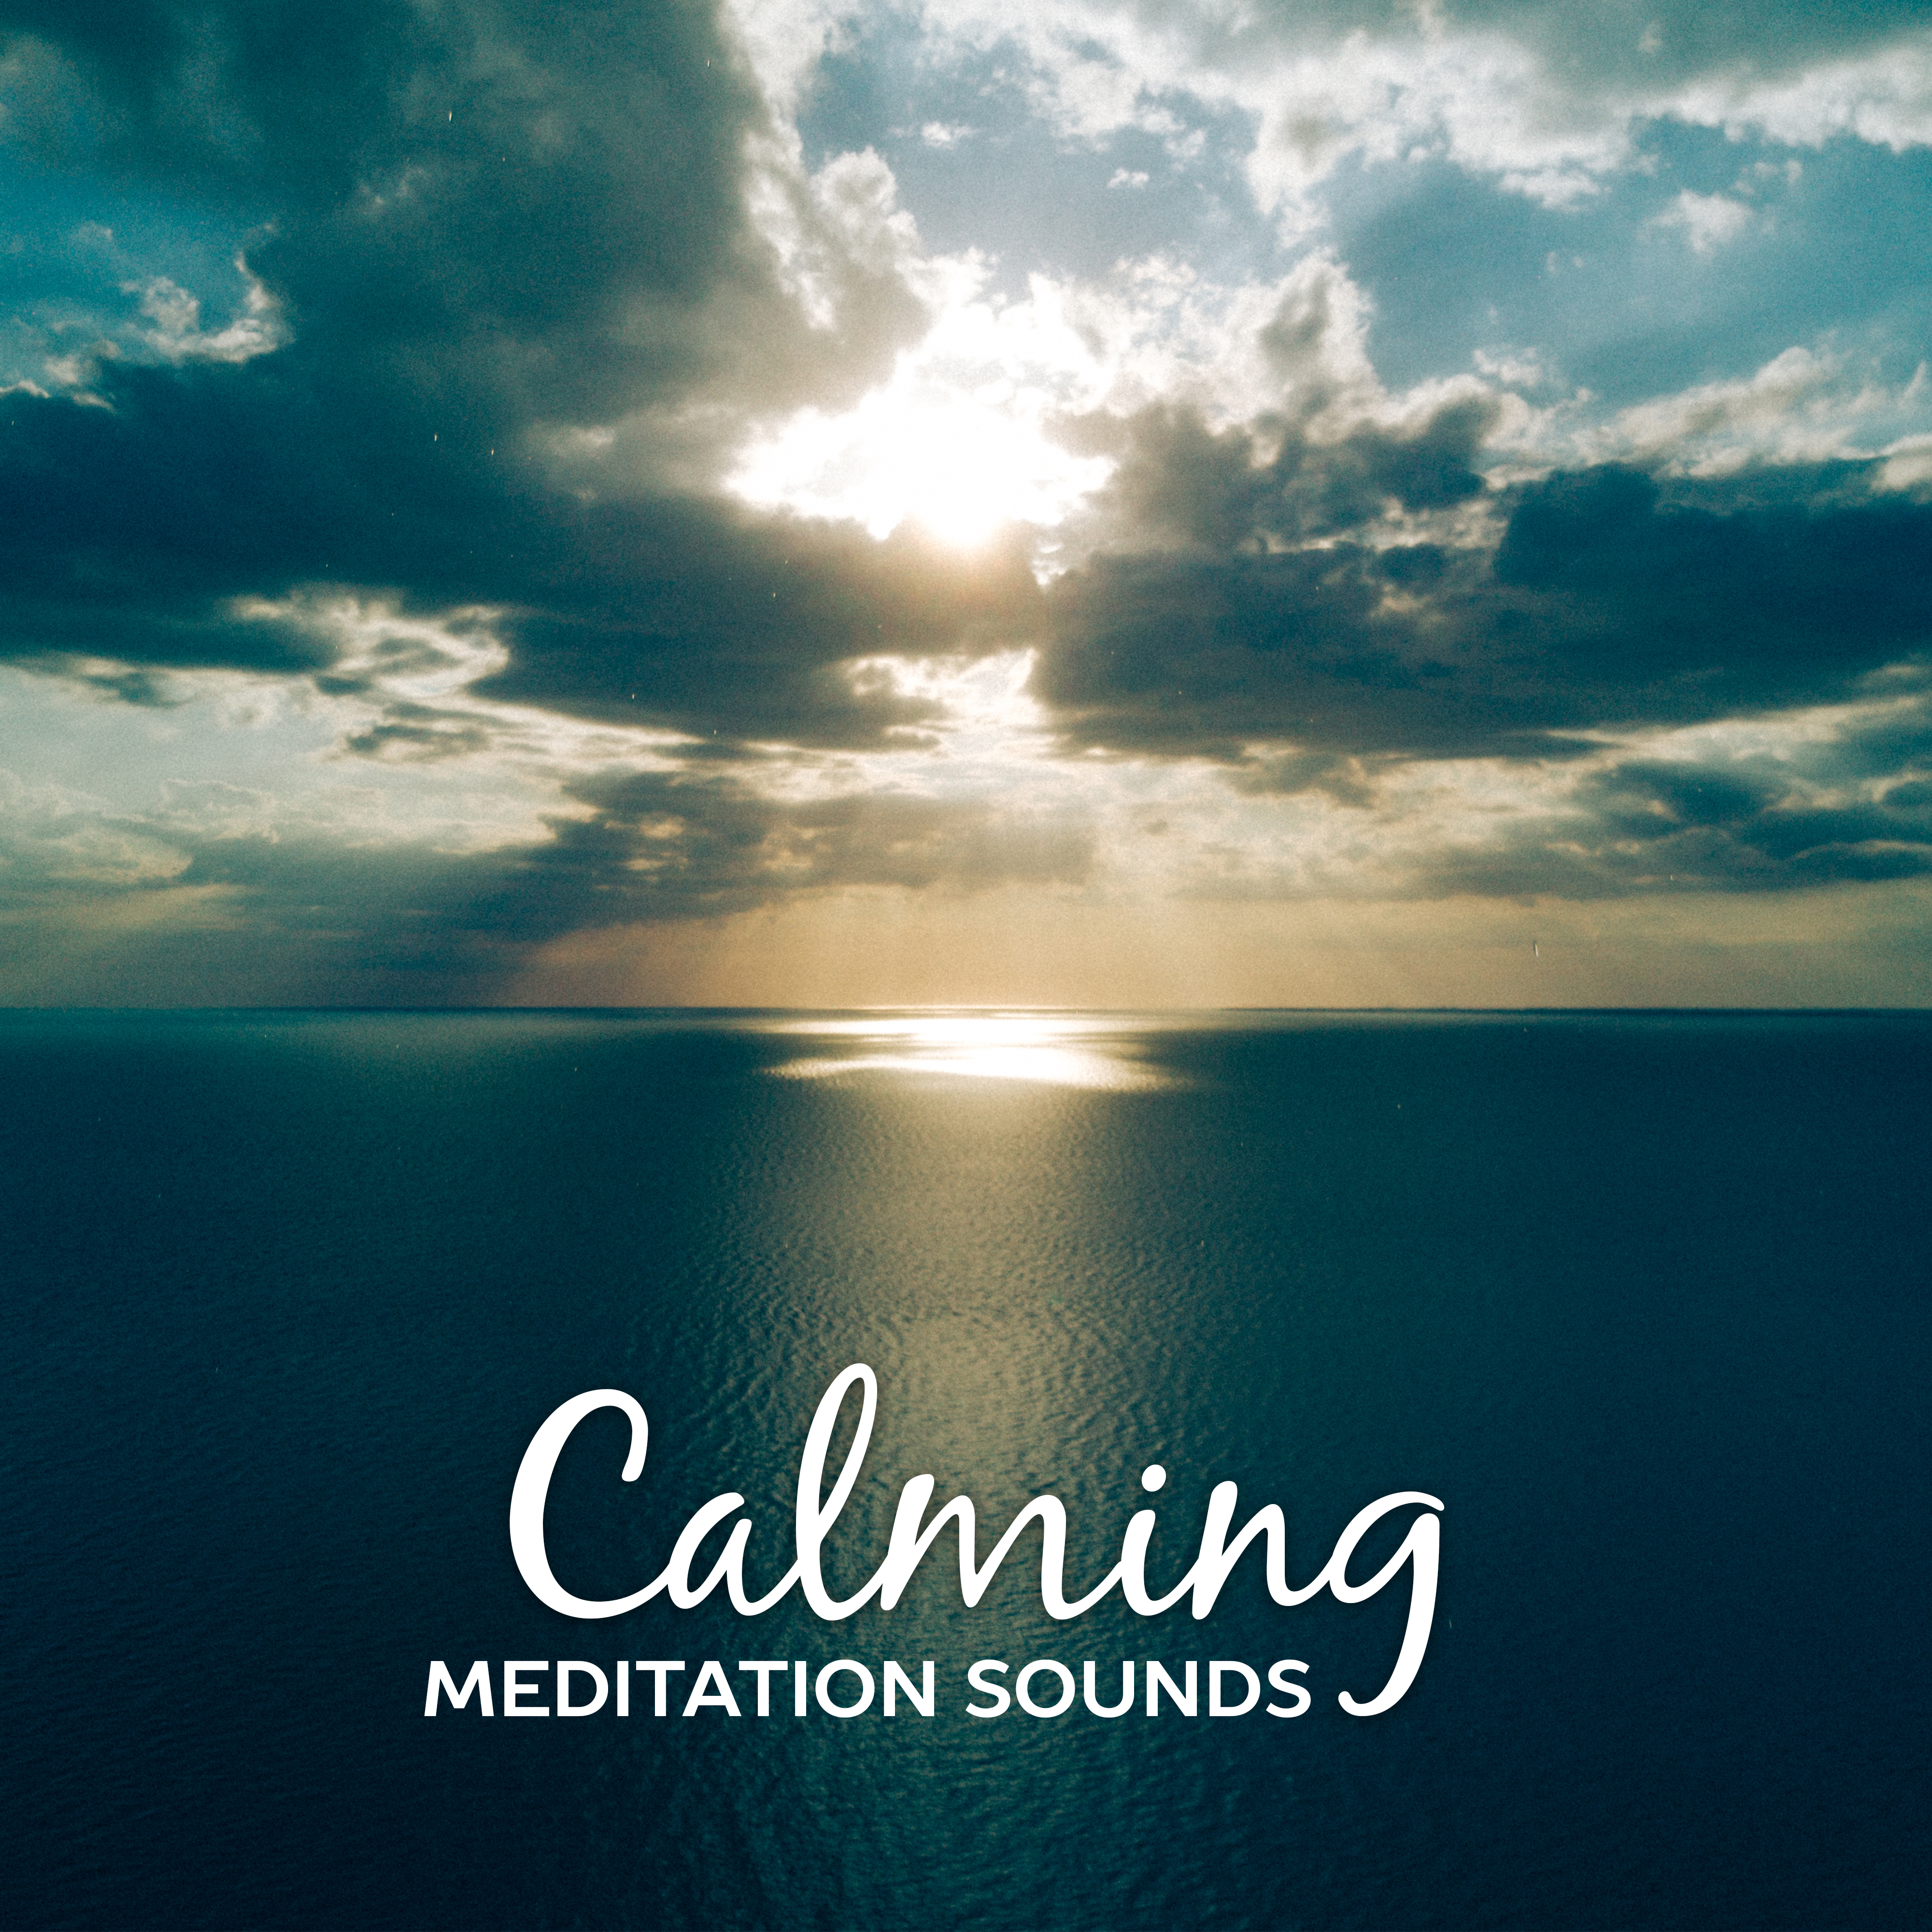 Calming Meditation Sounds – Chilled Ways to Relax, Meditation to Rest, Soul Journey, Spirit Free